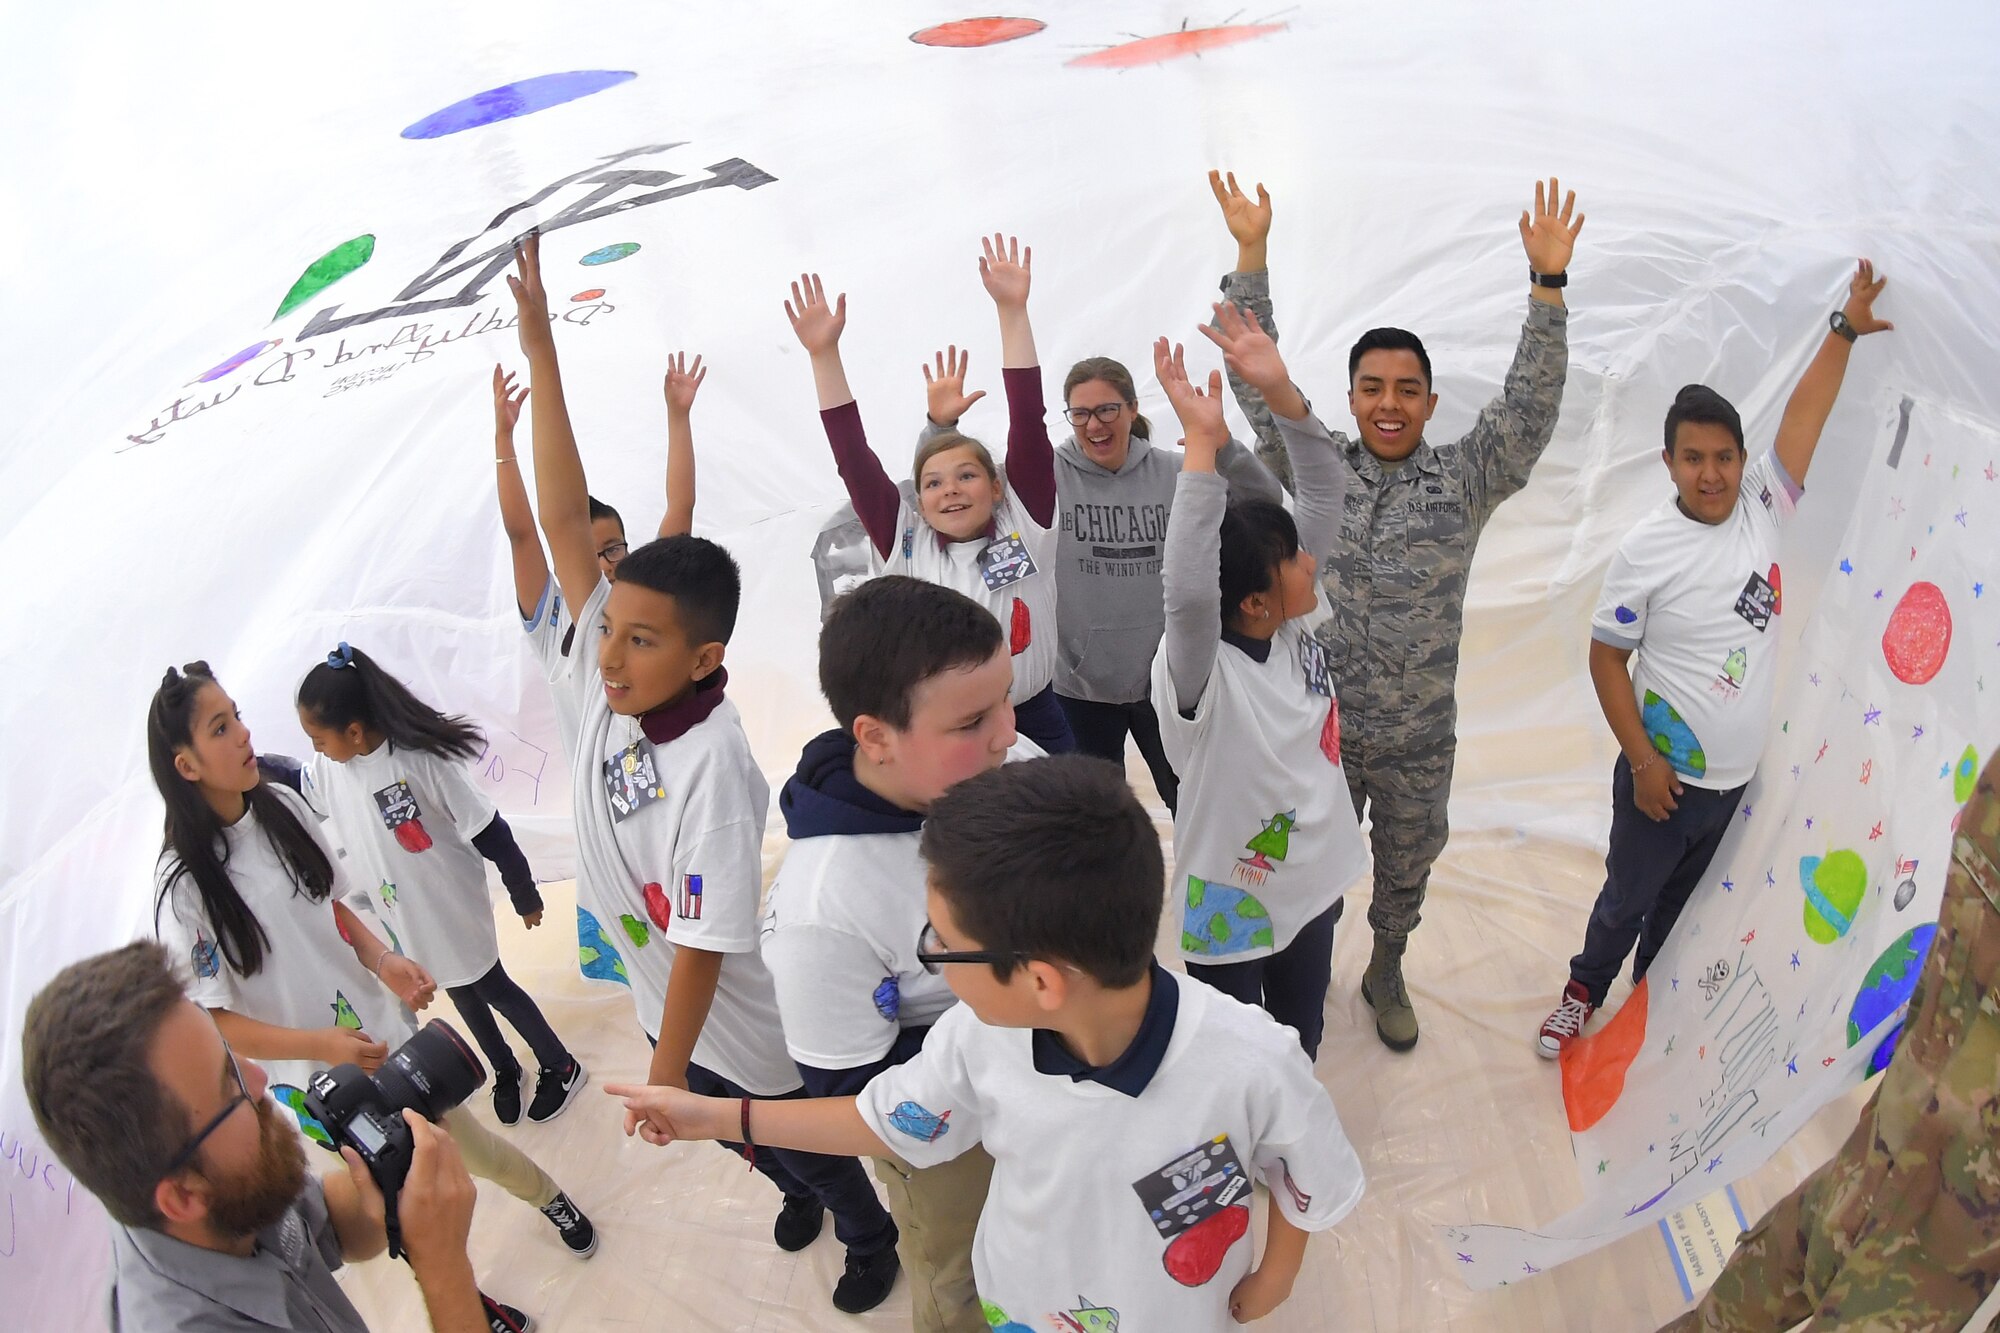 Airman 1st Class Kenny Dela Cruz, 75th Comptroller Squadron, and fifth grade school children during the building of a simulated space habitat called ‘Mission to Mars’ at Weber State University May 2, 2019. Mission to Mars is facilitated by Hill Air Force Base as part of the STEM Outreach Program, which partners with local school teachers by providing a curriculum, materials and events to teach STEM-related subjects in a creative and fun environment. (U.S. Air Force photo by Todd Cromar)